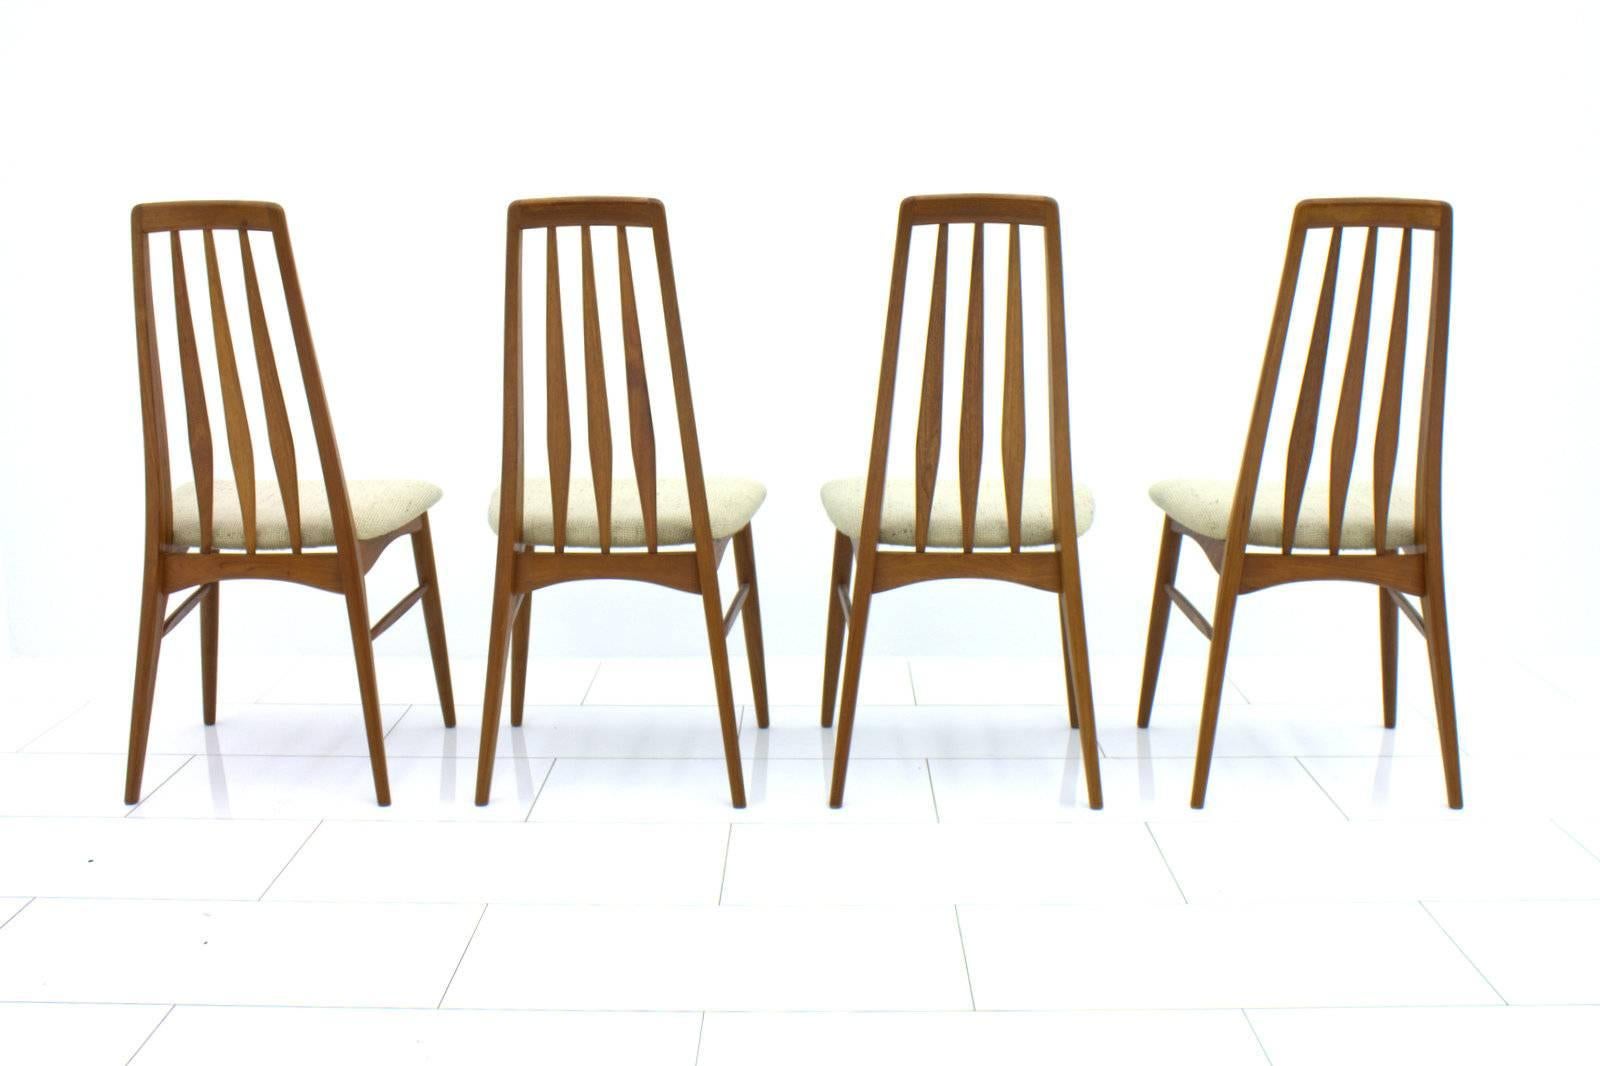 Set of Four Niels Koefoed EVA Teak Dining Chairs, Hornslet Denmark 1960s
Original wool fabric.
Excellent condition.

Worldwide shipping.